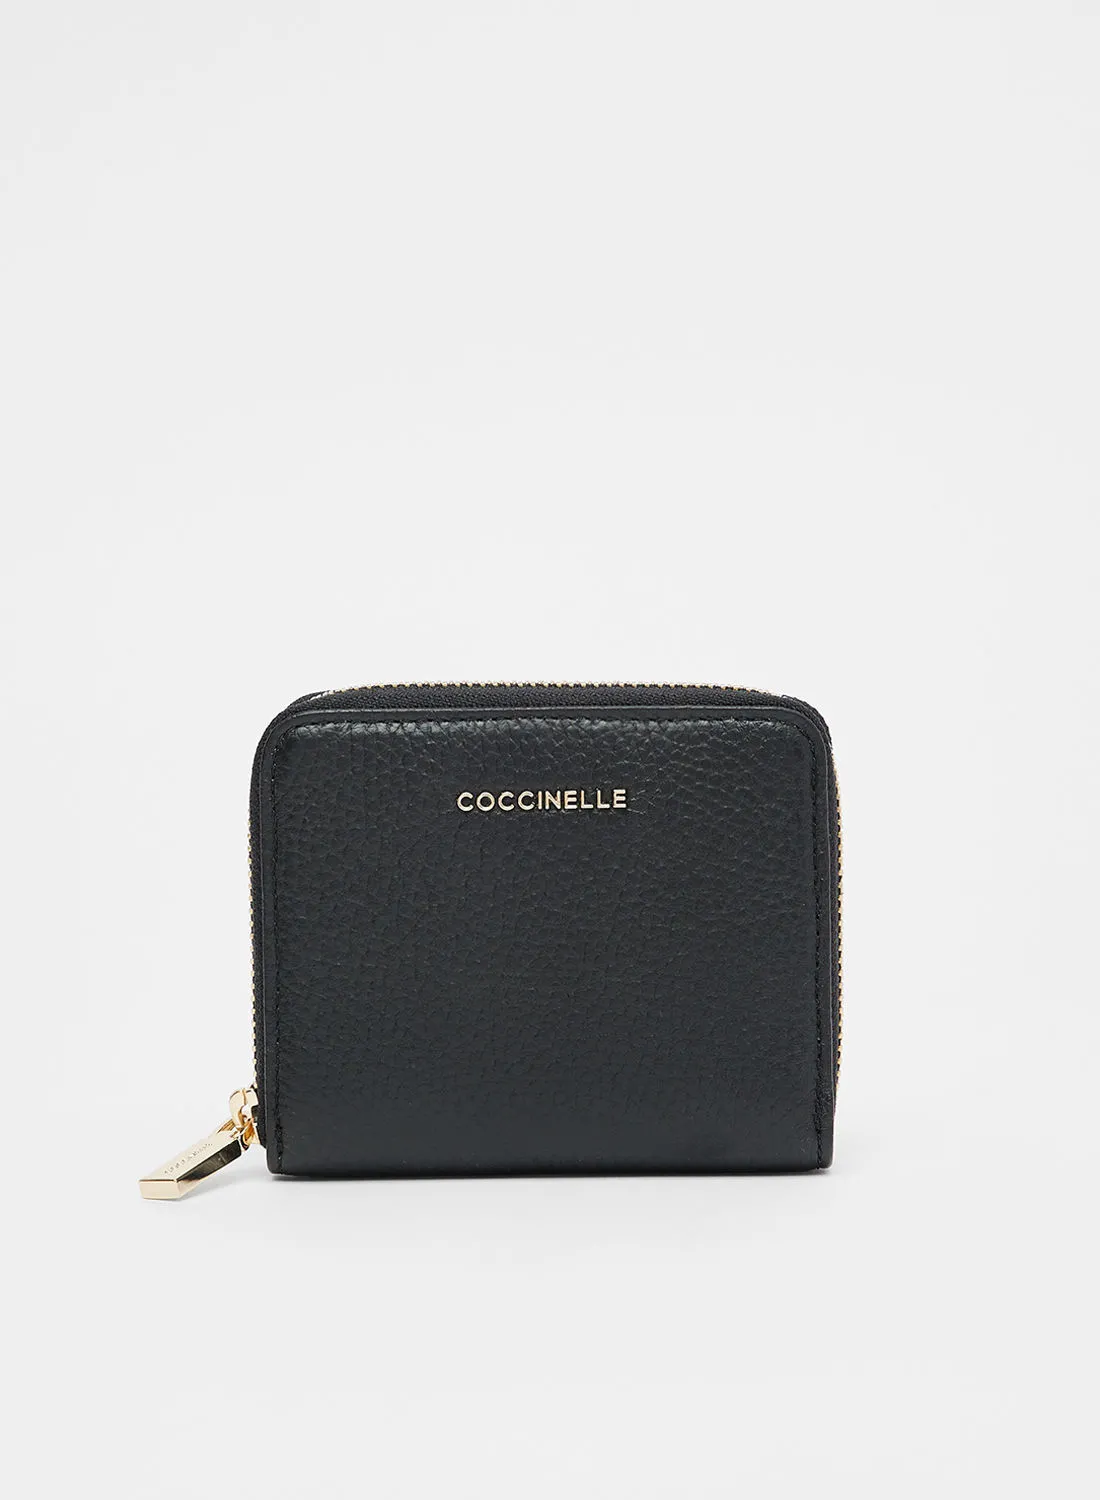 COCCINELLE Pebbled Leather Wallet